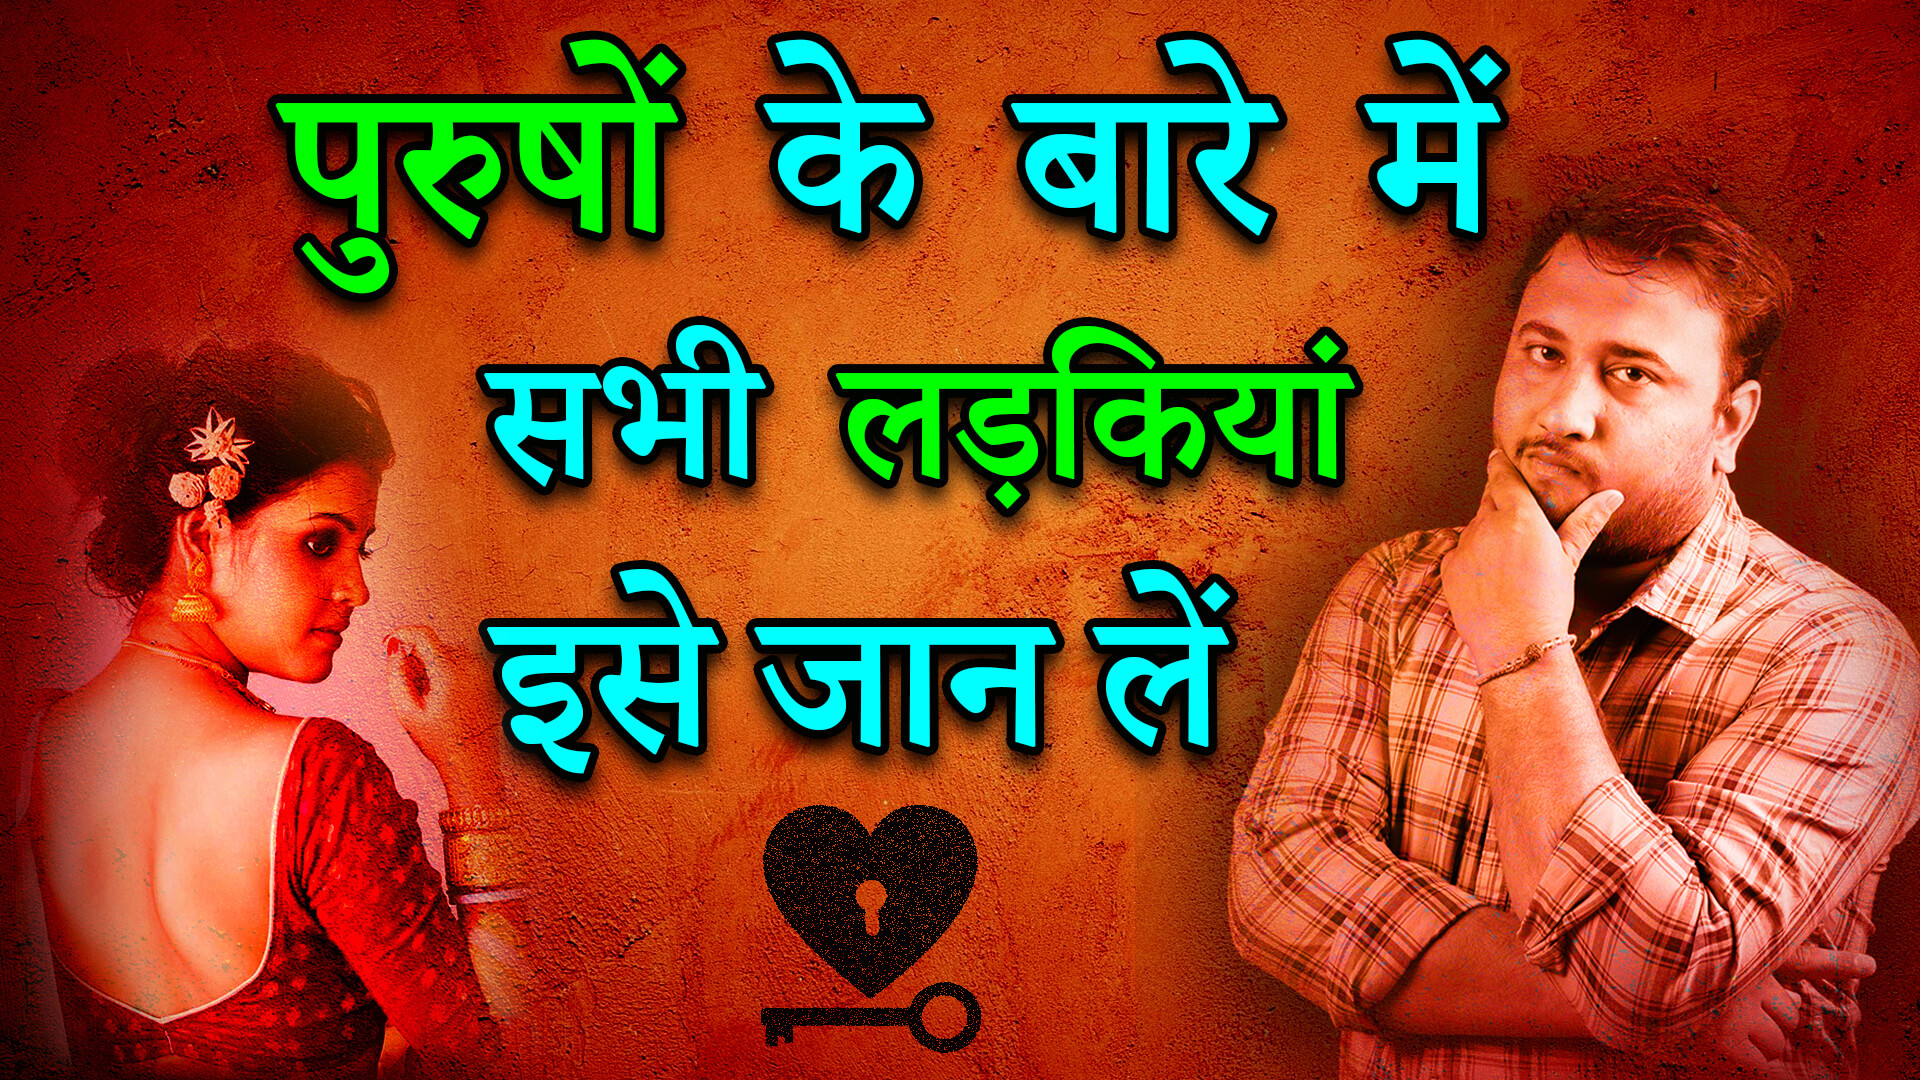 You are currently viewing सभी लड़कियां इसे जान लें – All Girls Should Understand This about Men